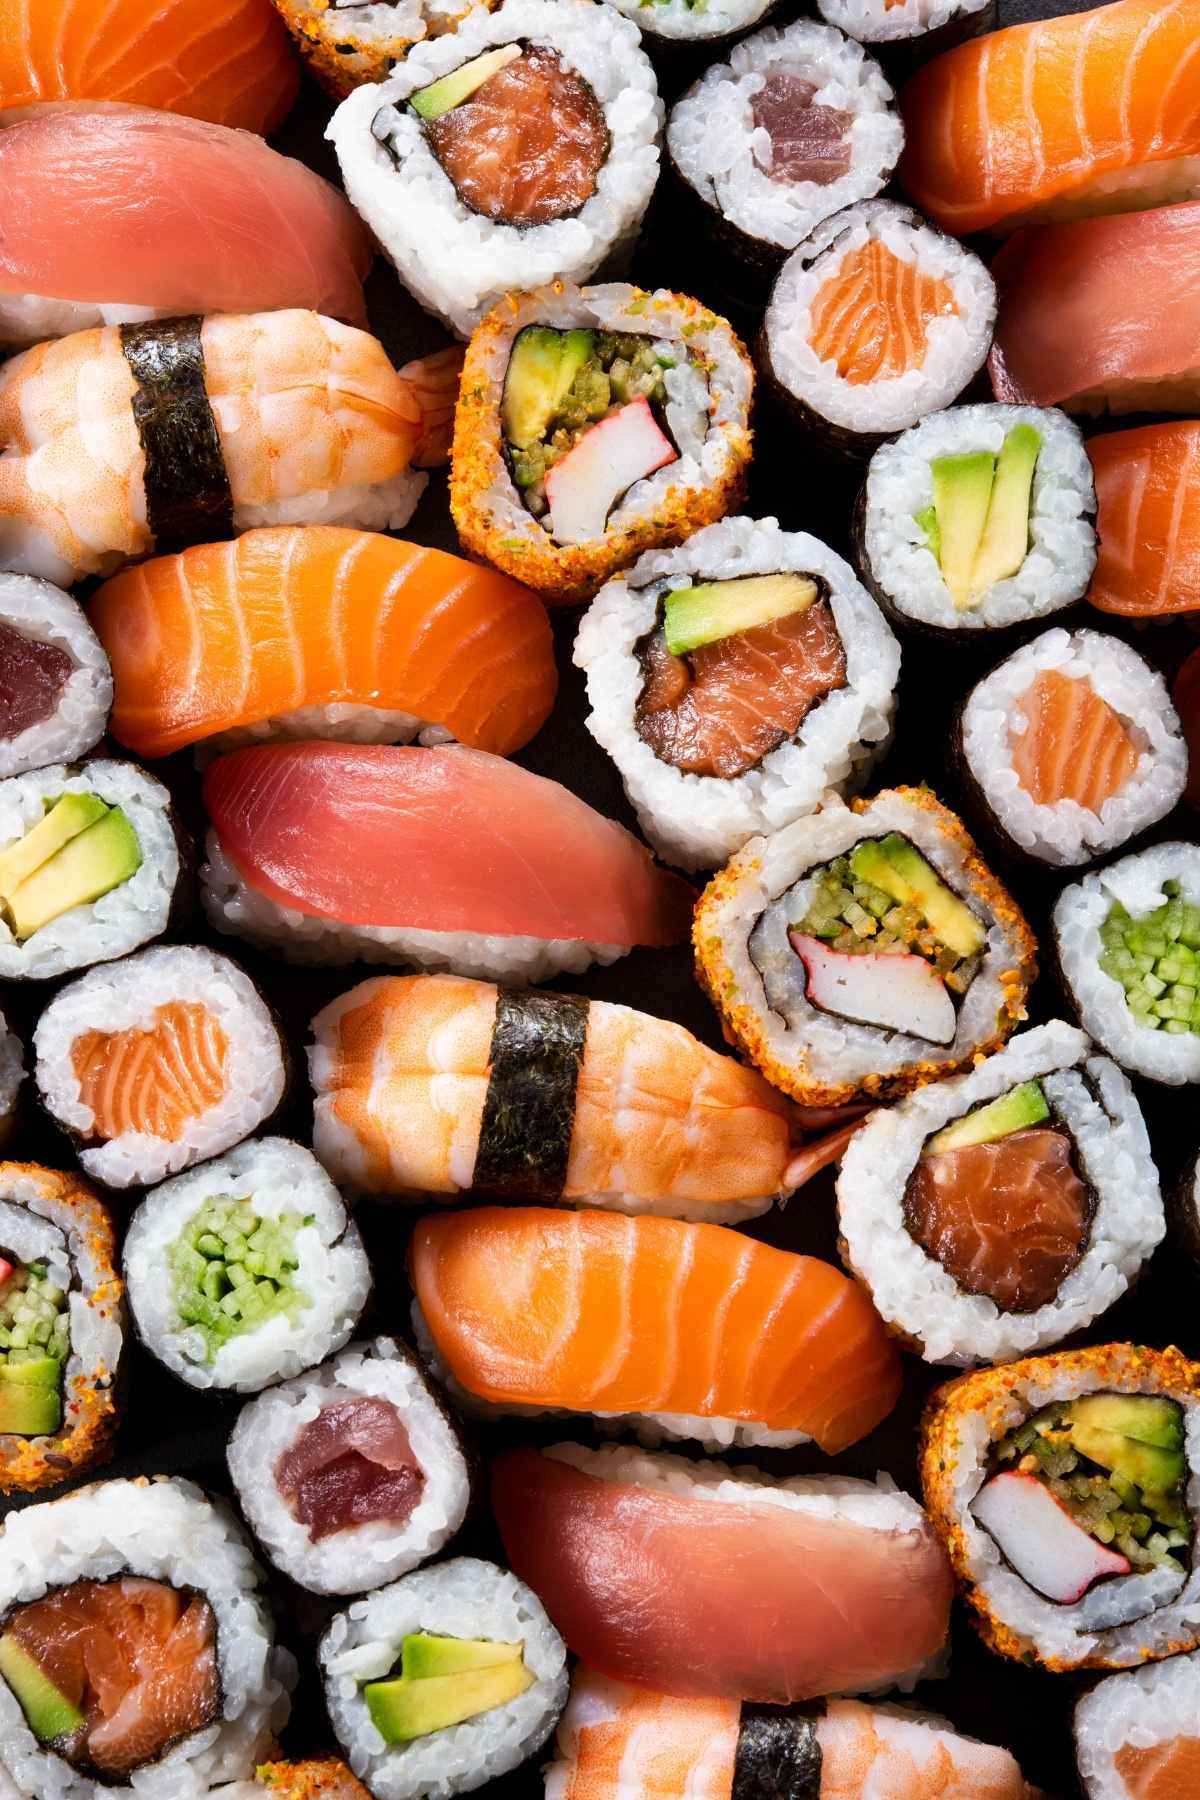 Have you ever wondered just how long sushi can sit out for? Whether you were in a rush and left it sitting out, or waiting for guests to arrive or you’re dealing with leftovers, it can raise this very question!